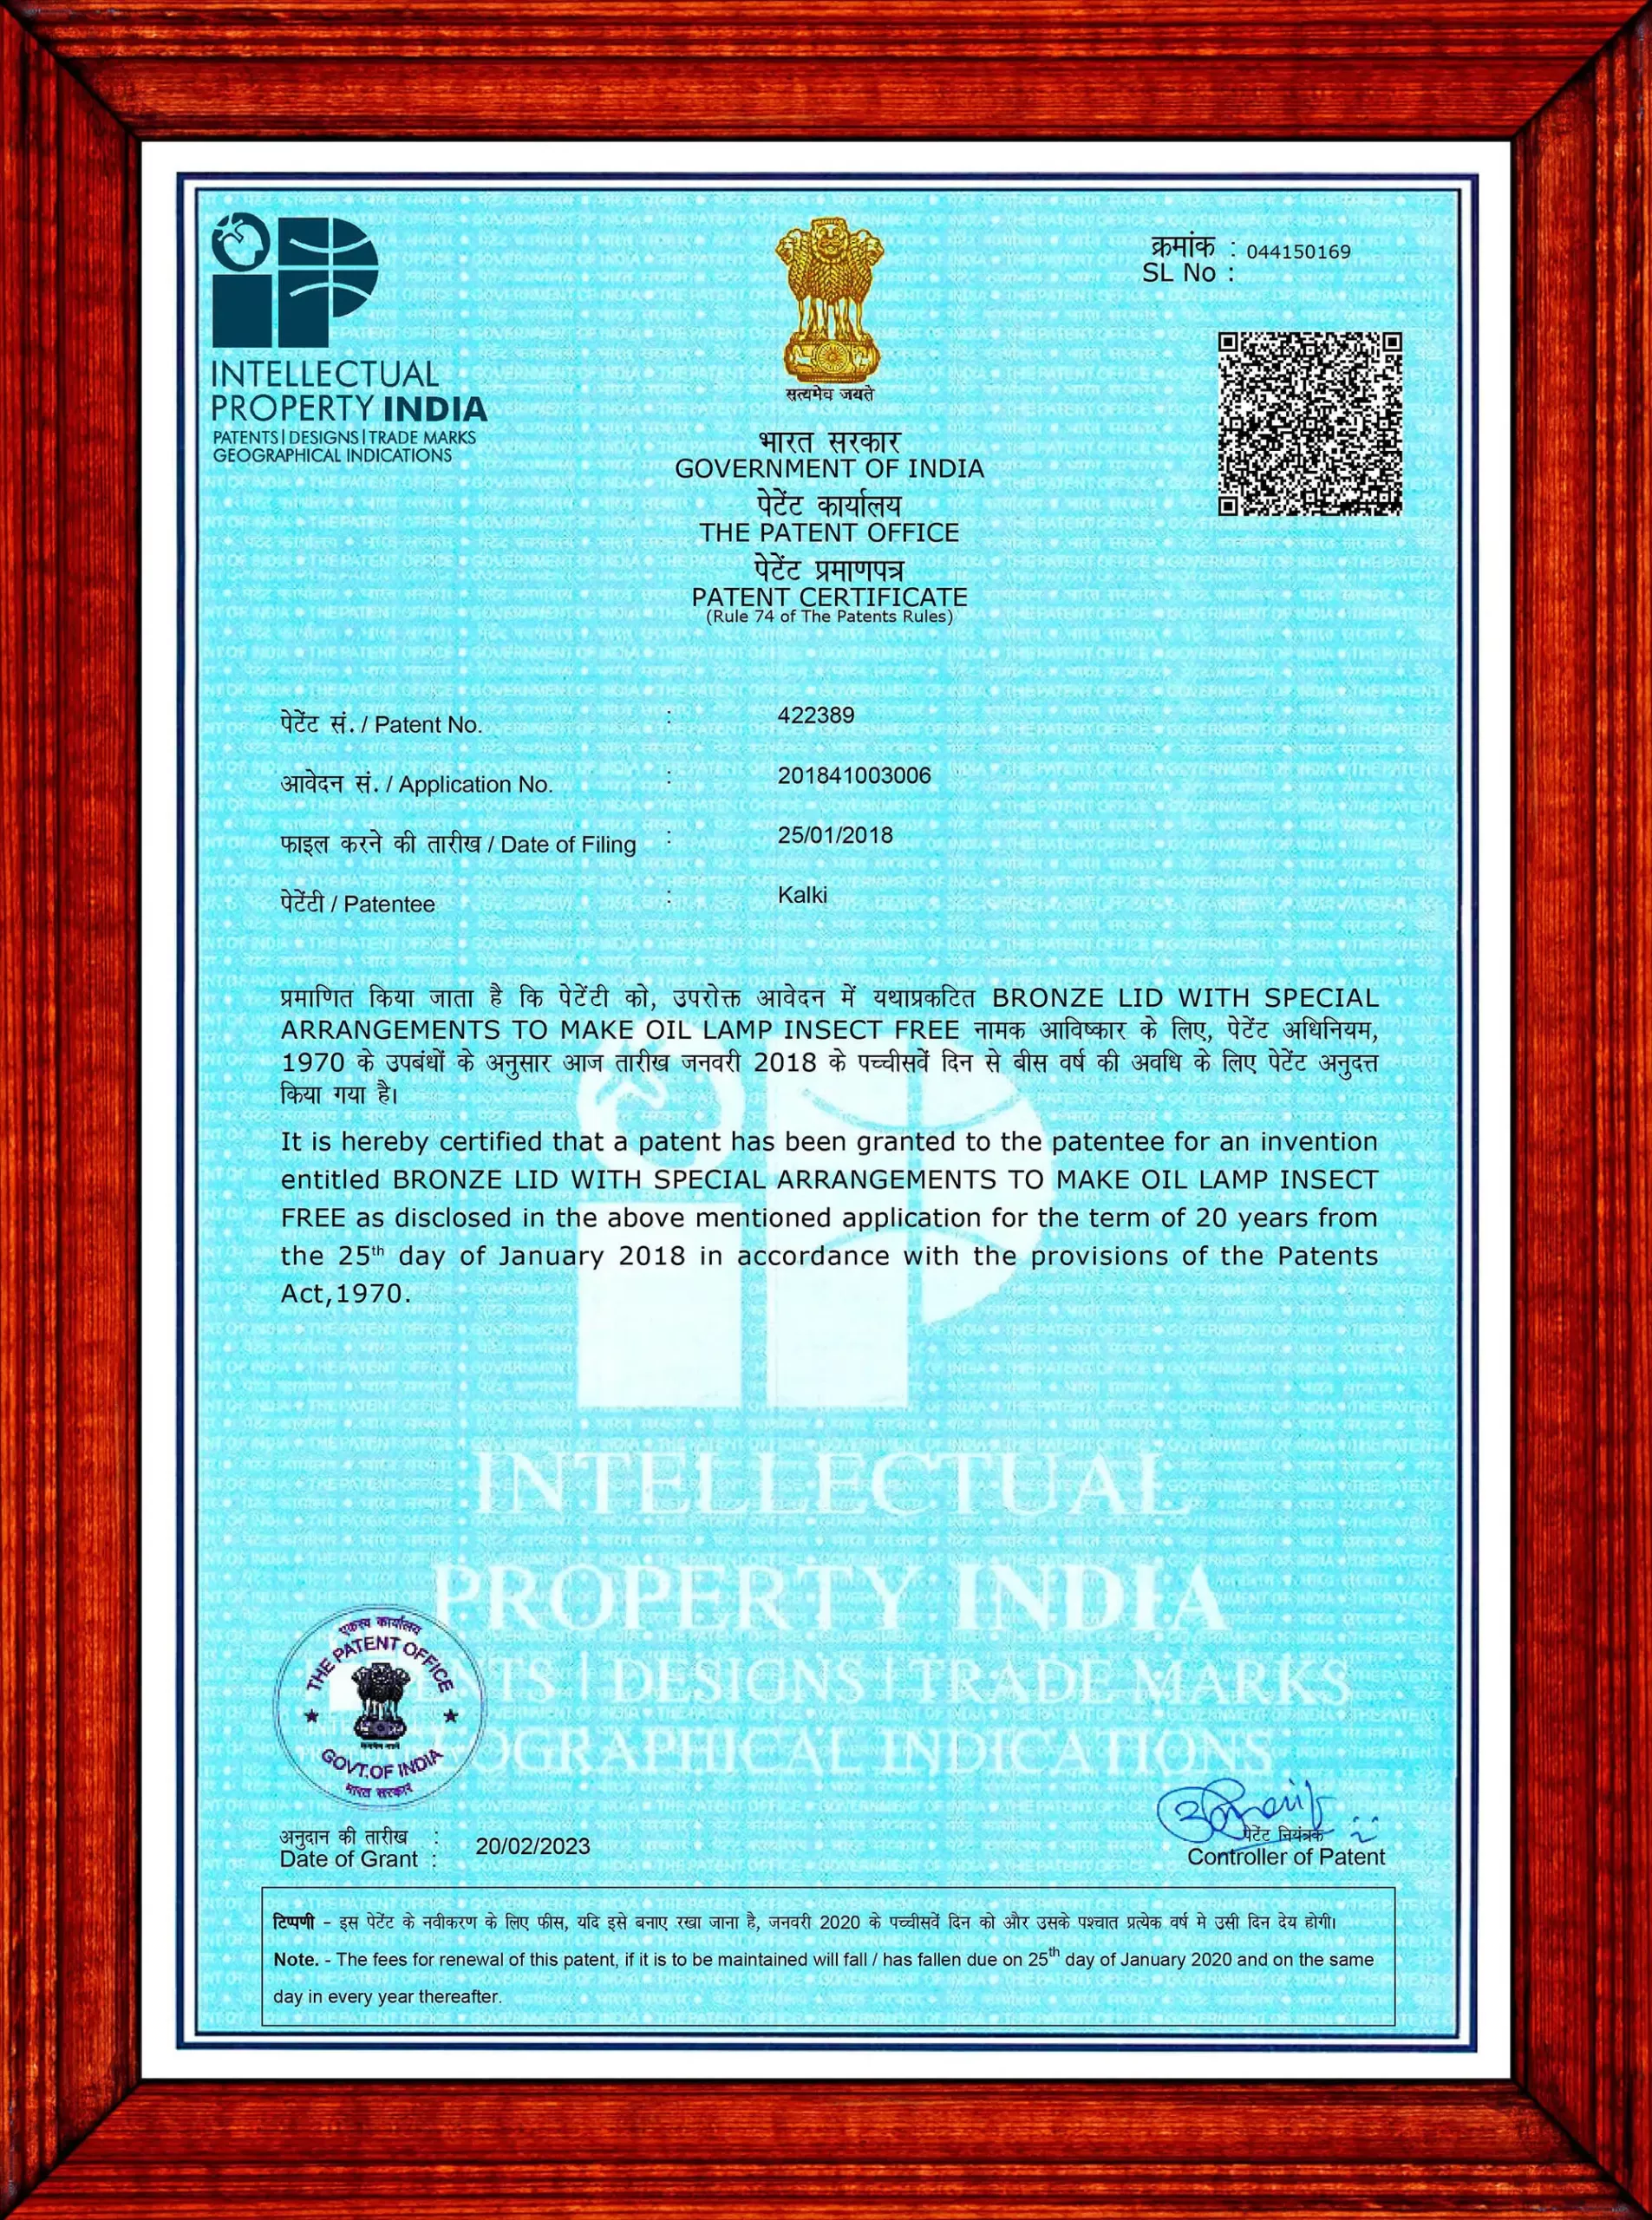 Patent (No.422389) certificate. Kalki is the patent holder.